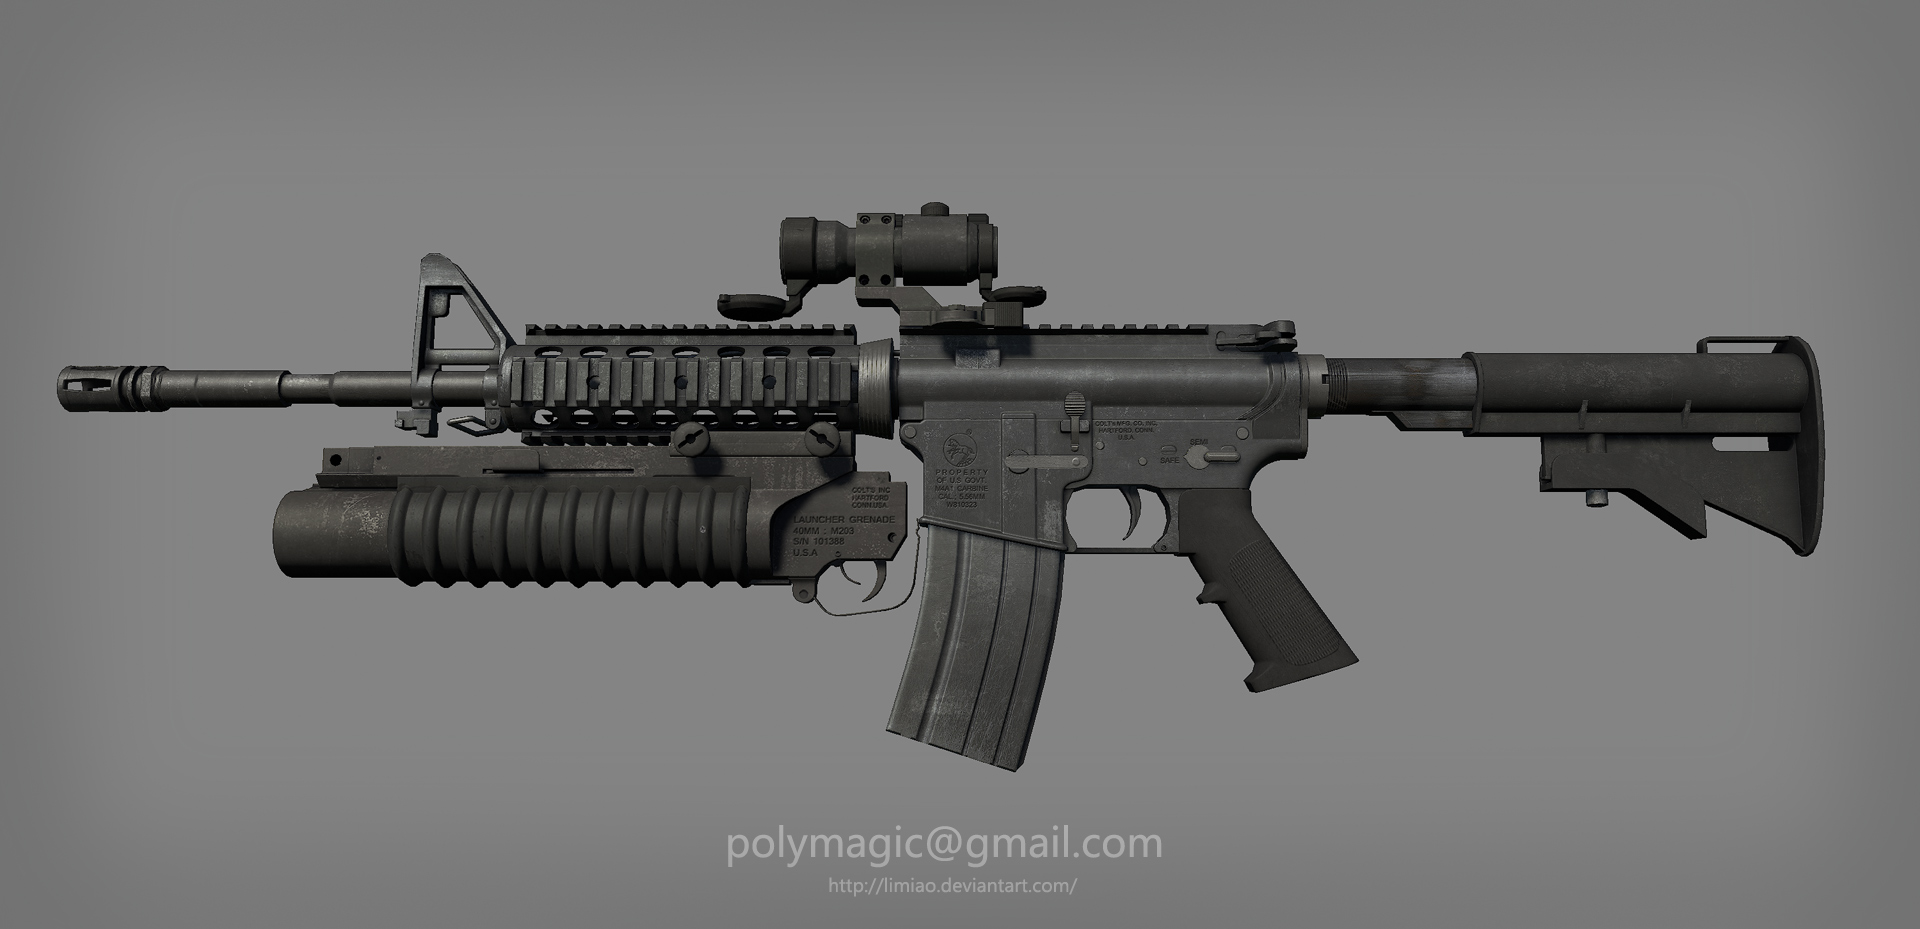 Cyber security m4a4 bs фото 81